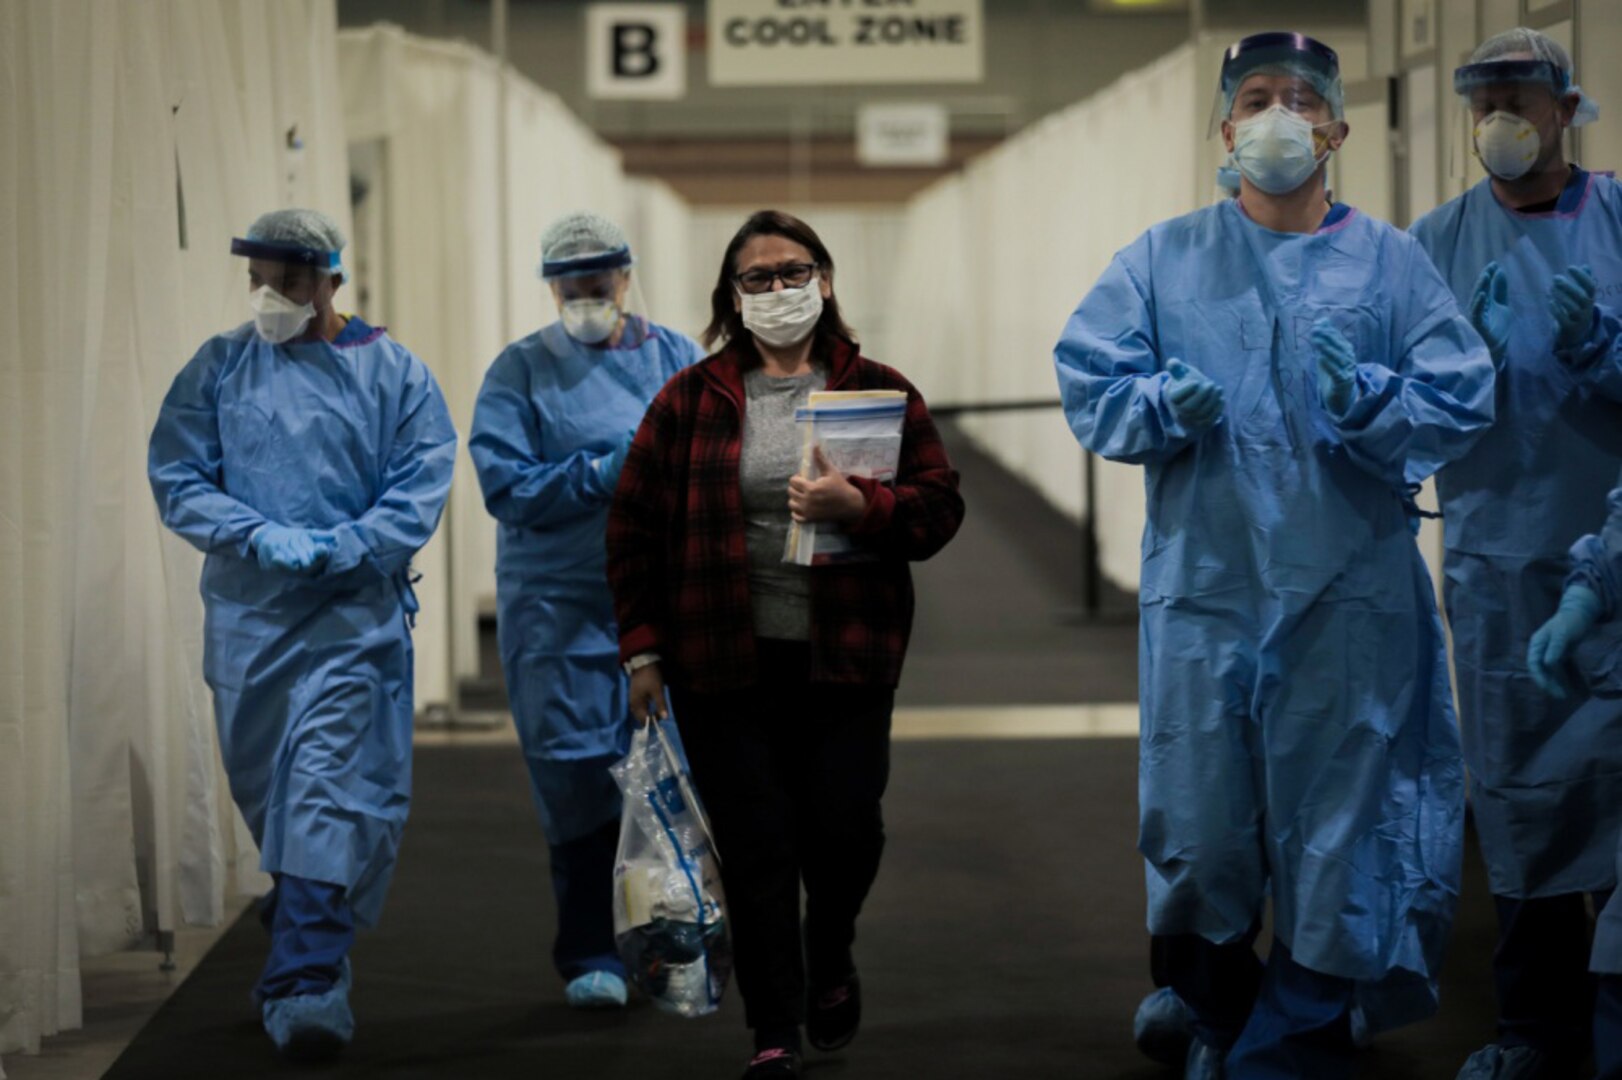 Mary Ruth Castello-Leal, a former COVID-19 patient, walks out of her temporary hospital room with her discharge paperwork at a field medical station in Atlantic City Atlantic City, N.J., May 6, 2020. Soldiers, airmen and civilian care providers celebrate as she leaves the facility.